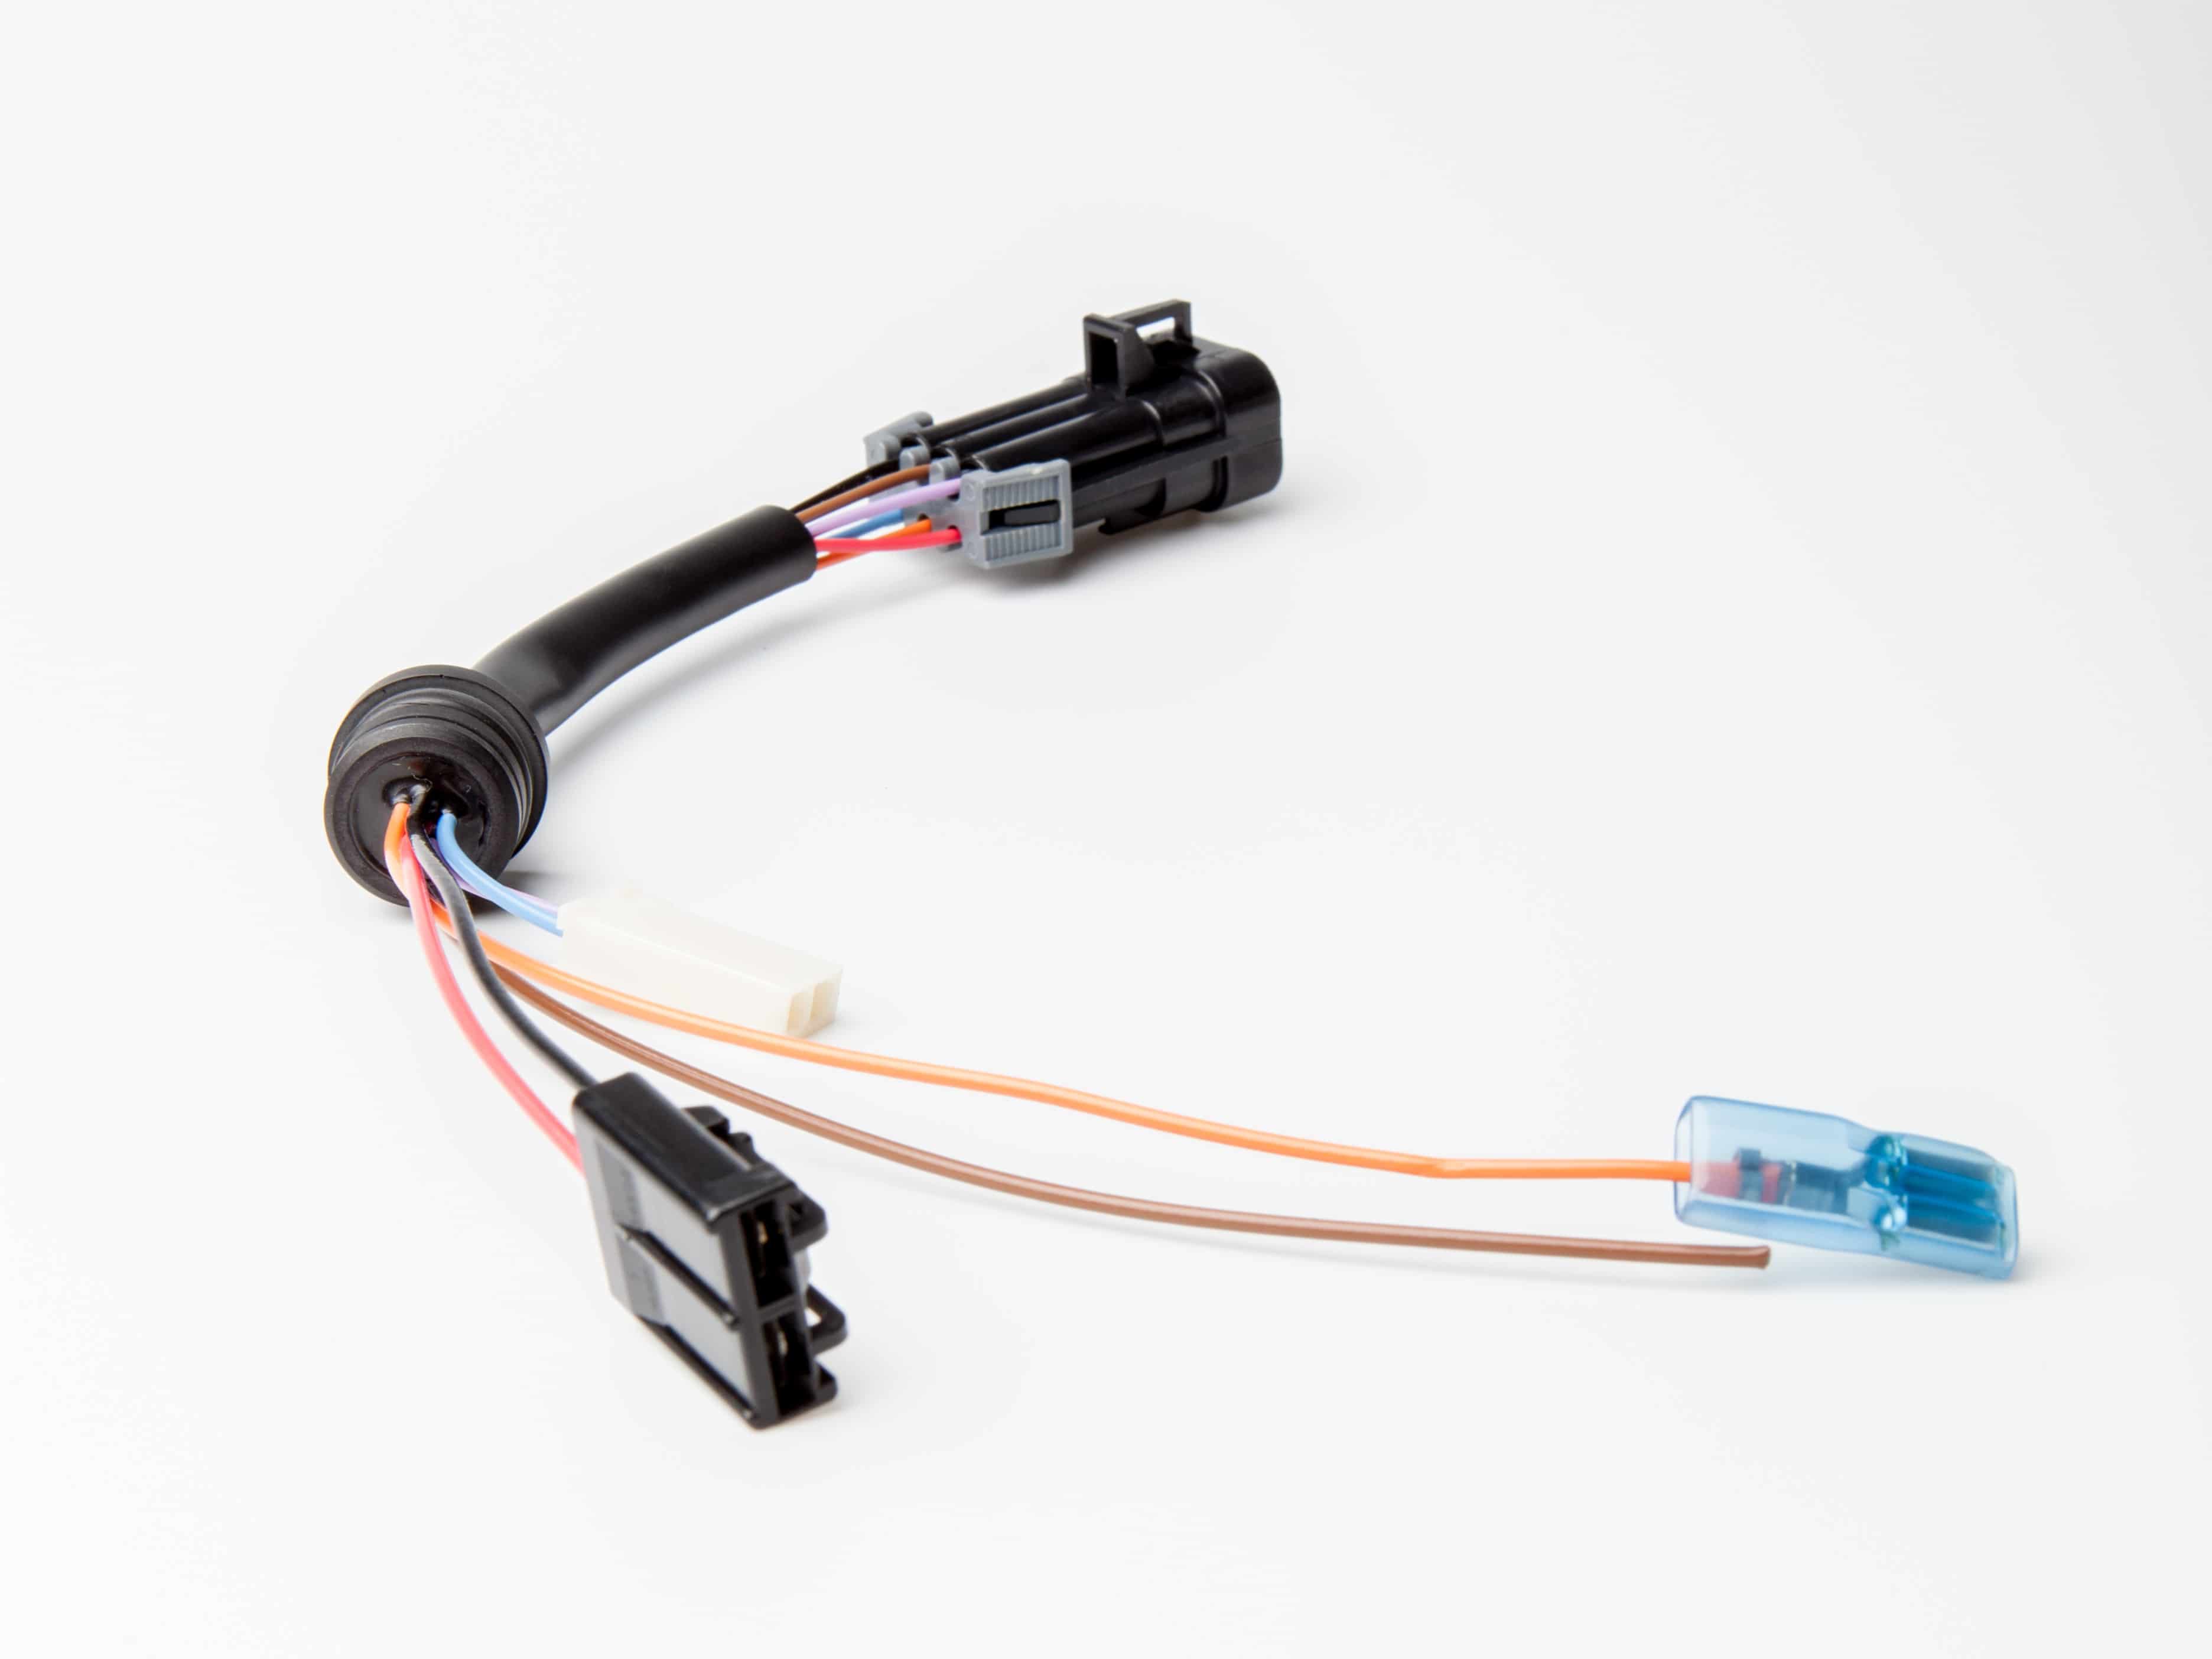 hermetically sealed automotive wire seal with integral connectors for plug-and-play install